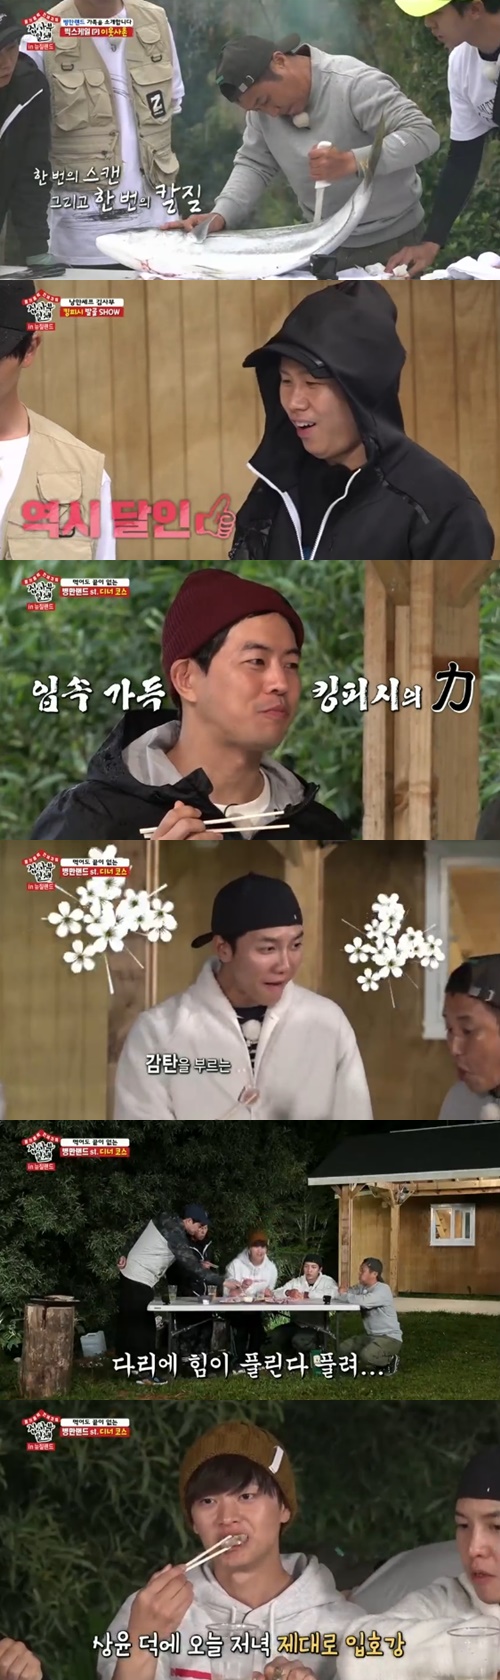 All The Butlers Kim Byung-man gave healing to his disciples with a great defense, a cross-desert sprint and a visit to Cape Fear Leinga.On SBS All The Butlers broadcast on the 22nd, Lee Seung-gi, Lee Sang-yoon, Yang Se-hyeong and Yook Sungjae visited the master Kim Byung-mans sickland.Kim Byung-man on the day began to dismantle the defense that Lee Sang-yoon had caught.Kim Byung-man scanned the Great Defensive once and succeeded in completely dismantling it with a few knife strokes, surprising the members.The fresh and ecstatic taste of the Great Defense impressed all the members, and there was a competition for taste expression.In particular, Yook Sungjae laughed, saying, Defense, beef, and pork taste appear at once.Kim Byung-man later told members that there was someplace I really want to take.Earlier, Lee Seung-gi, who appeared in Master Son Ye-jin, predicted a cross desert race with the goal of 2019.Kim Byung-man took his four pupils to the vast desert to achieve Lee Seung-gis goal; the members struggled up to the top of the steeply sloping desert.They walked for a long time, not giving up, especially after suffering from the sun and the sand, and finally they arrived at the end of the desert, and were amazed and impressed by the enormous sight.Lee Sang-yoon was surprised by the gift given by Mother Nature, saying, It is like a lie, Lee Seung-gi said, The view is amazing.Kim Byung-man then took his four disciples to Cape Fear Leinga.He said, I had a sign in the direction of Seoul at the time of shooting Jungles Law, but the wind was gone.One of the goals was to put the Seoul sign again, he said.Photo: SBS broadcast screen